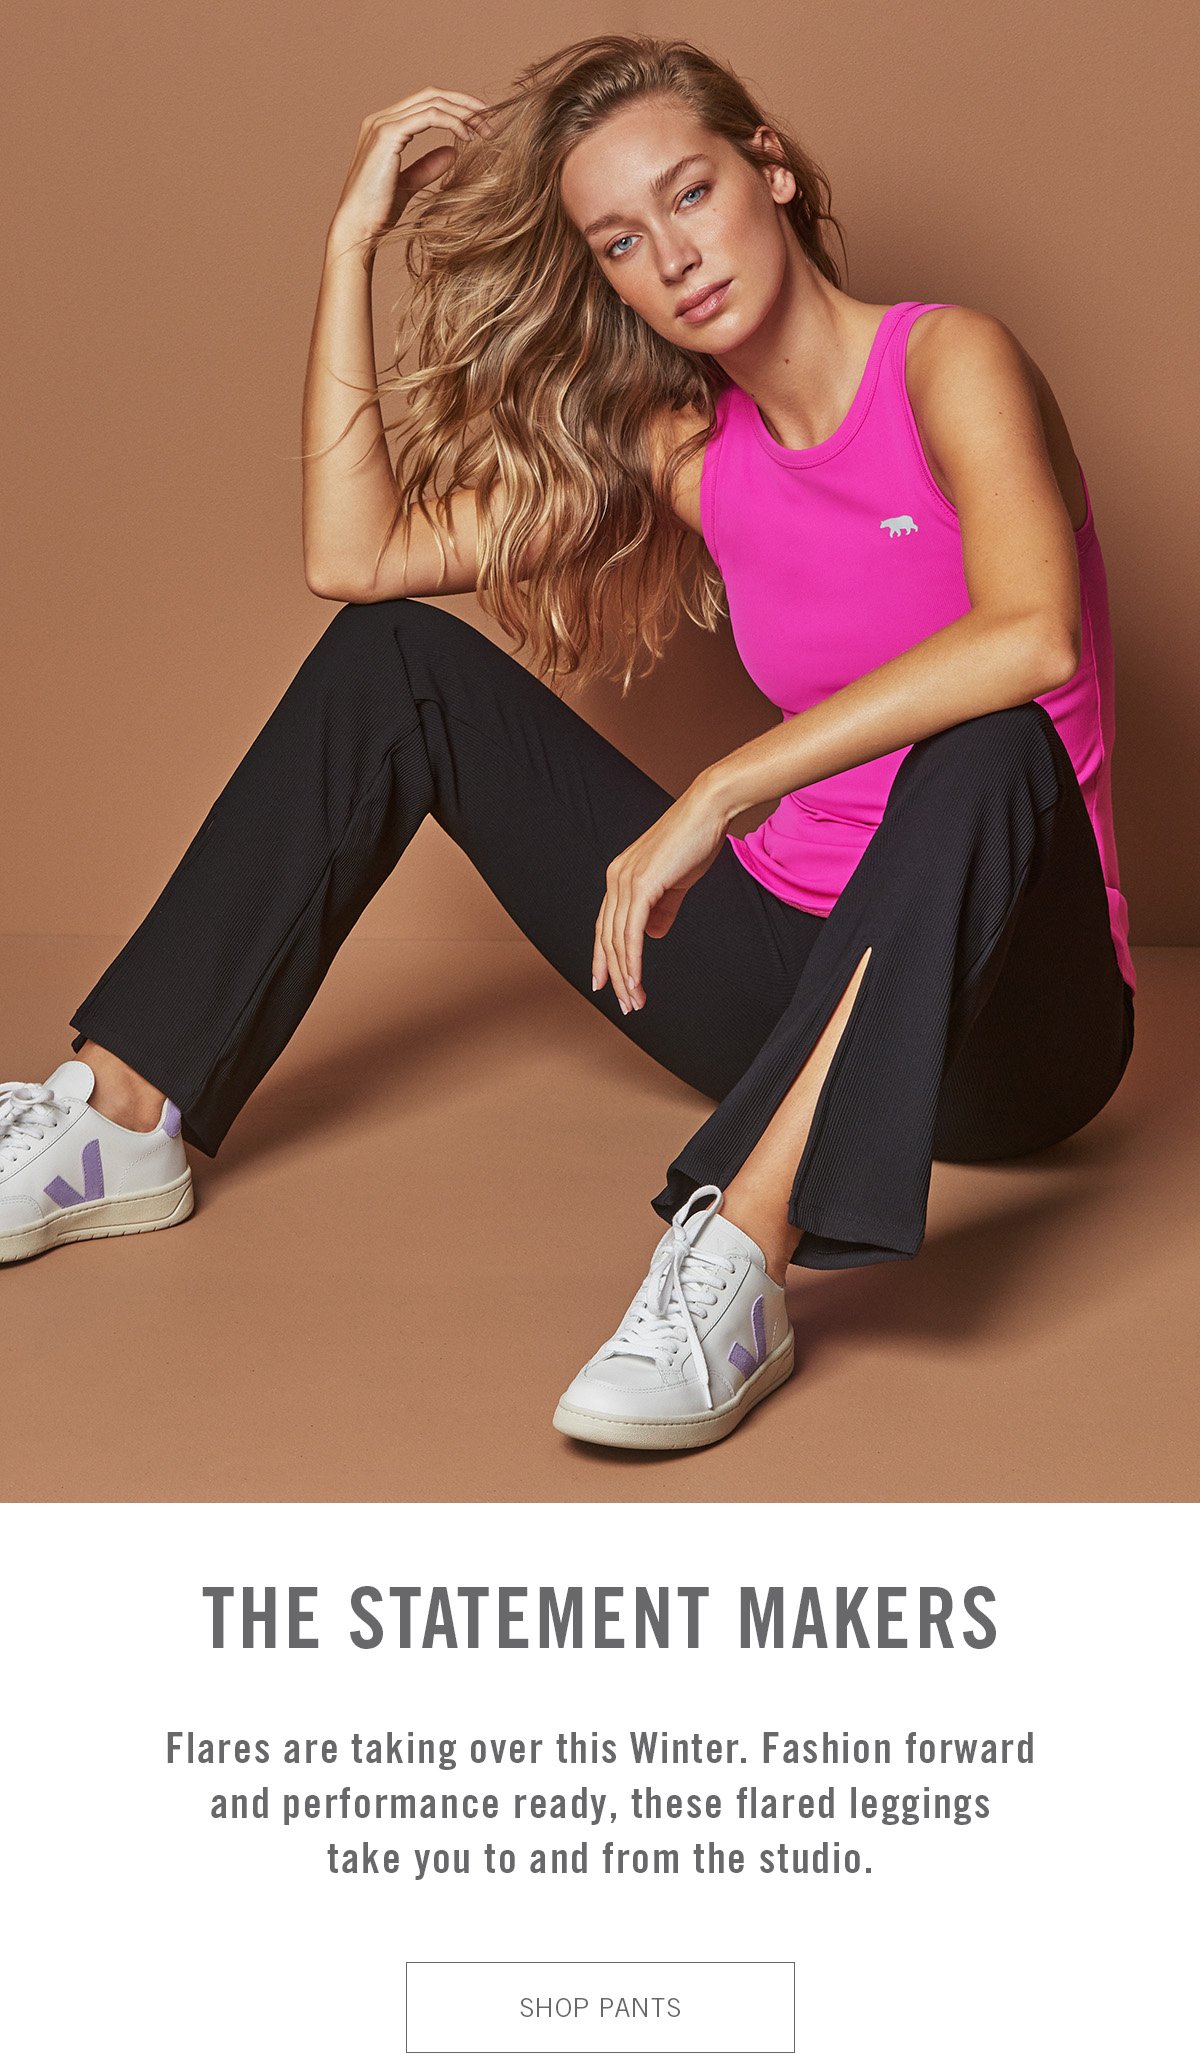 The Statement Makers